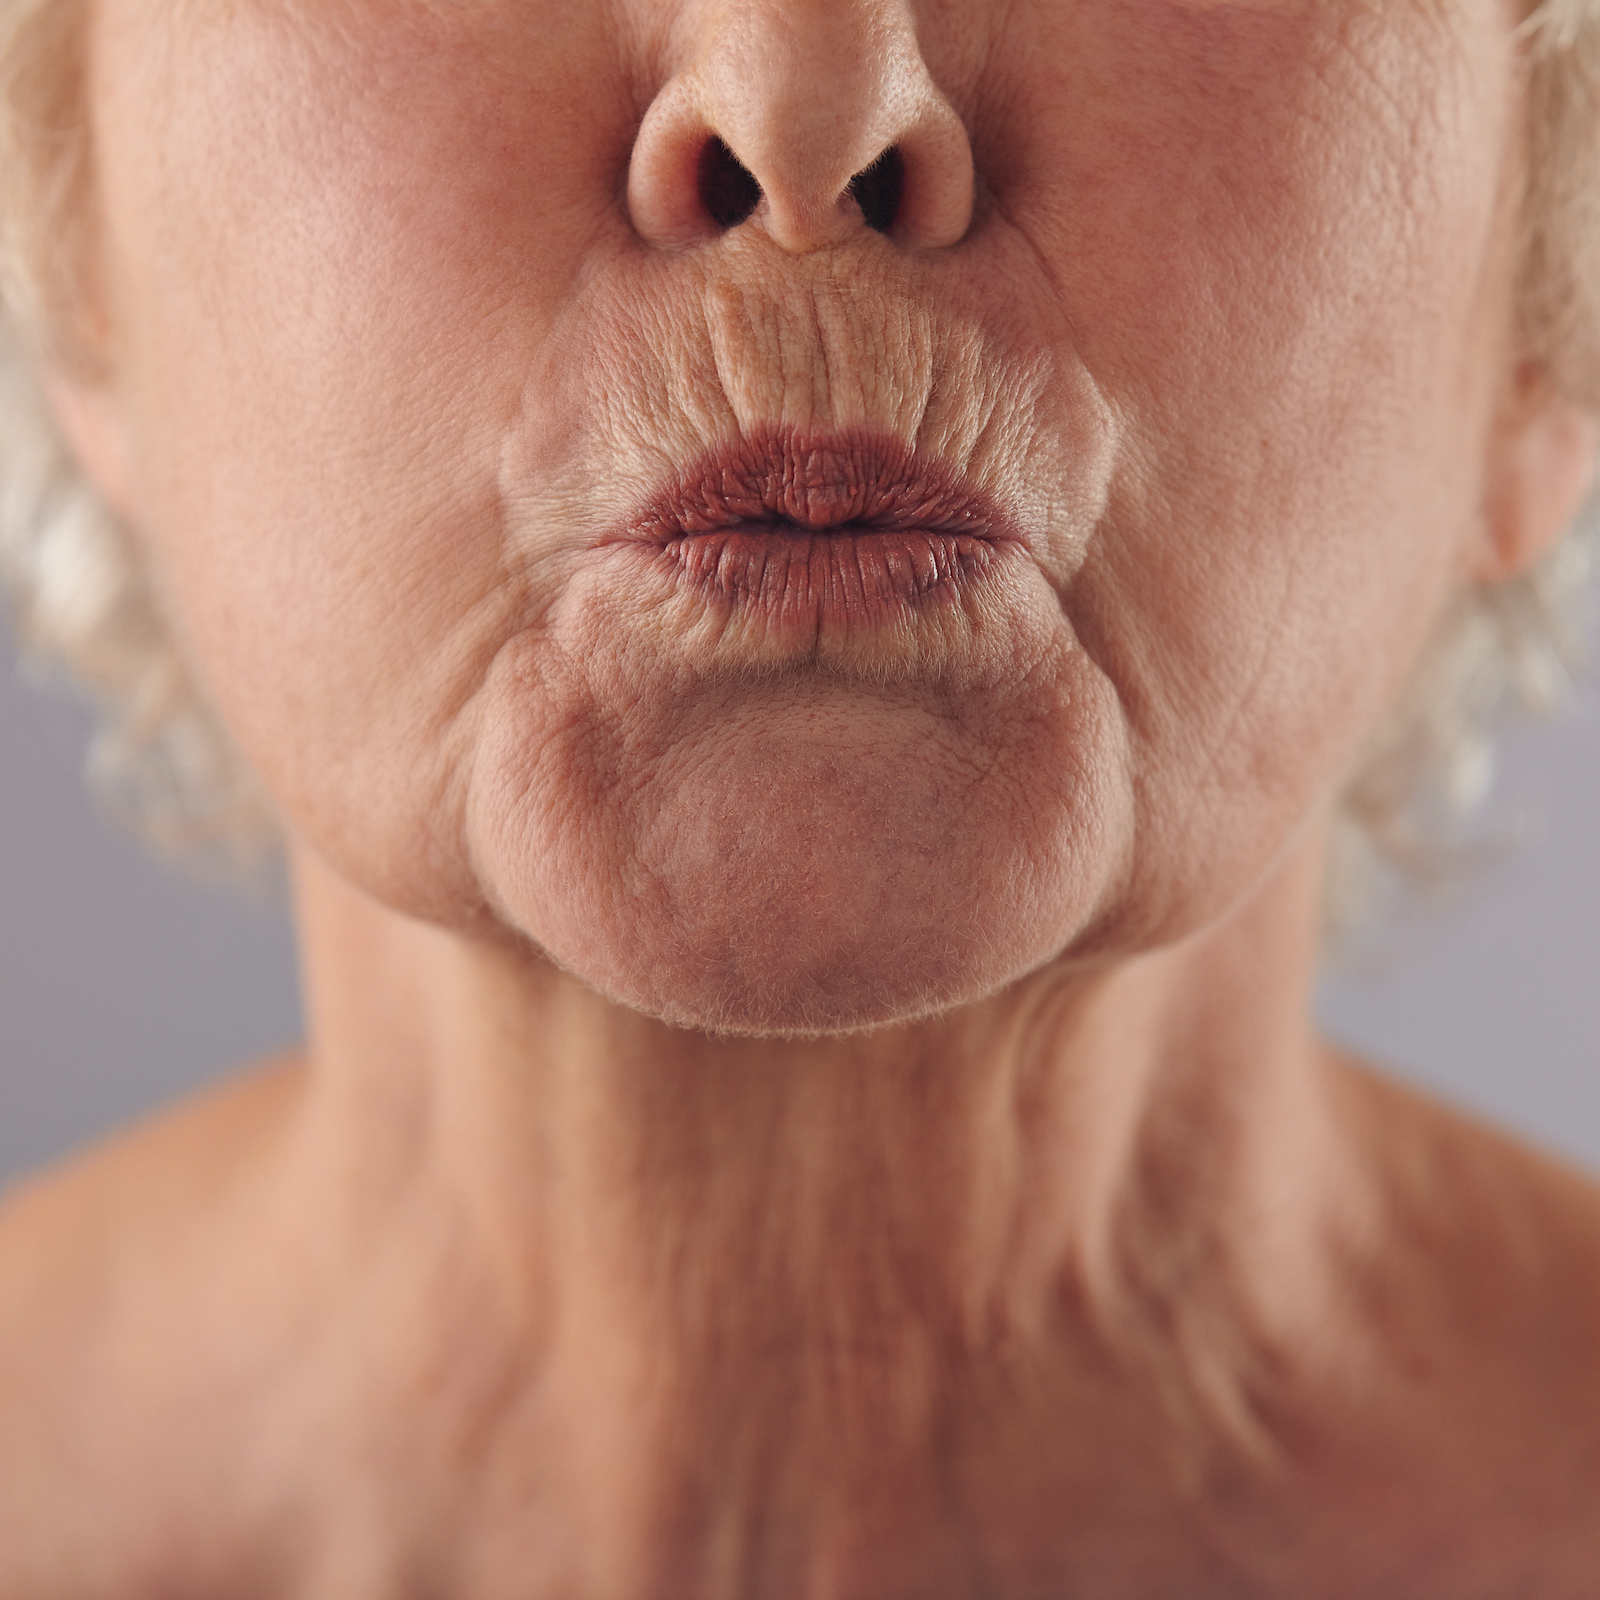 COPD Rhonchi with accessory muscle use and pursed lip breathing :  r/CoughingFetish